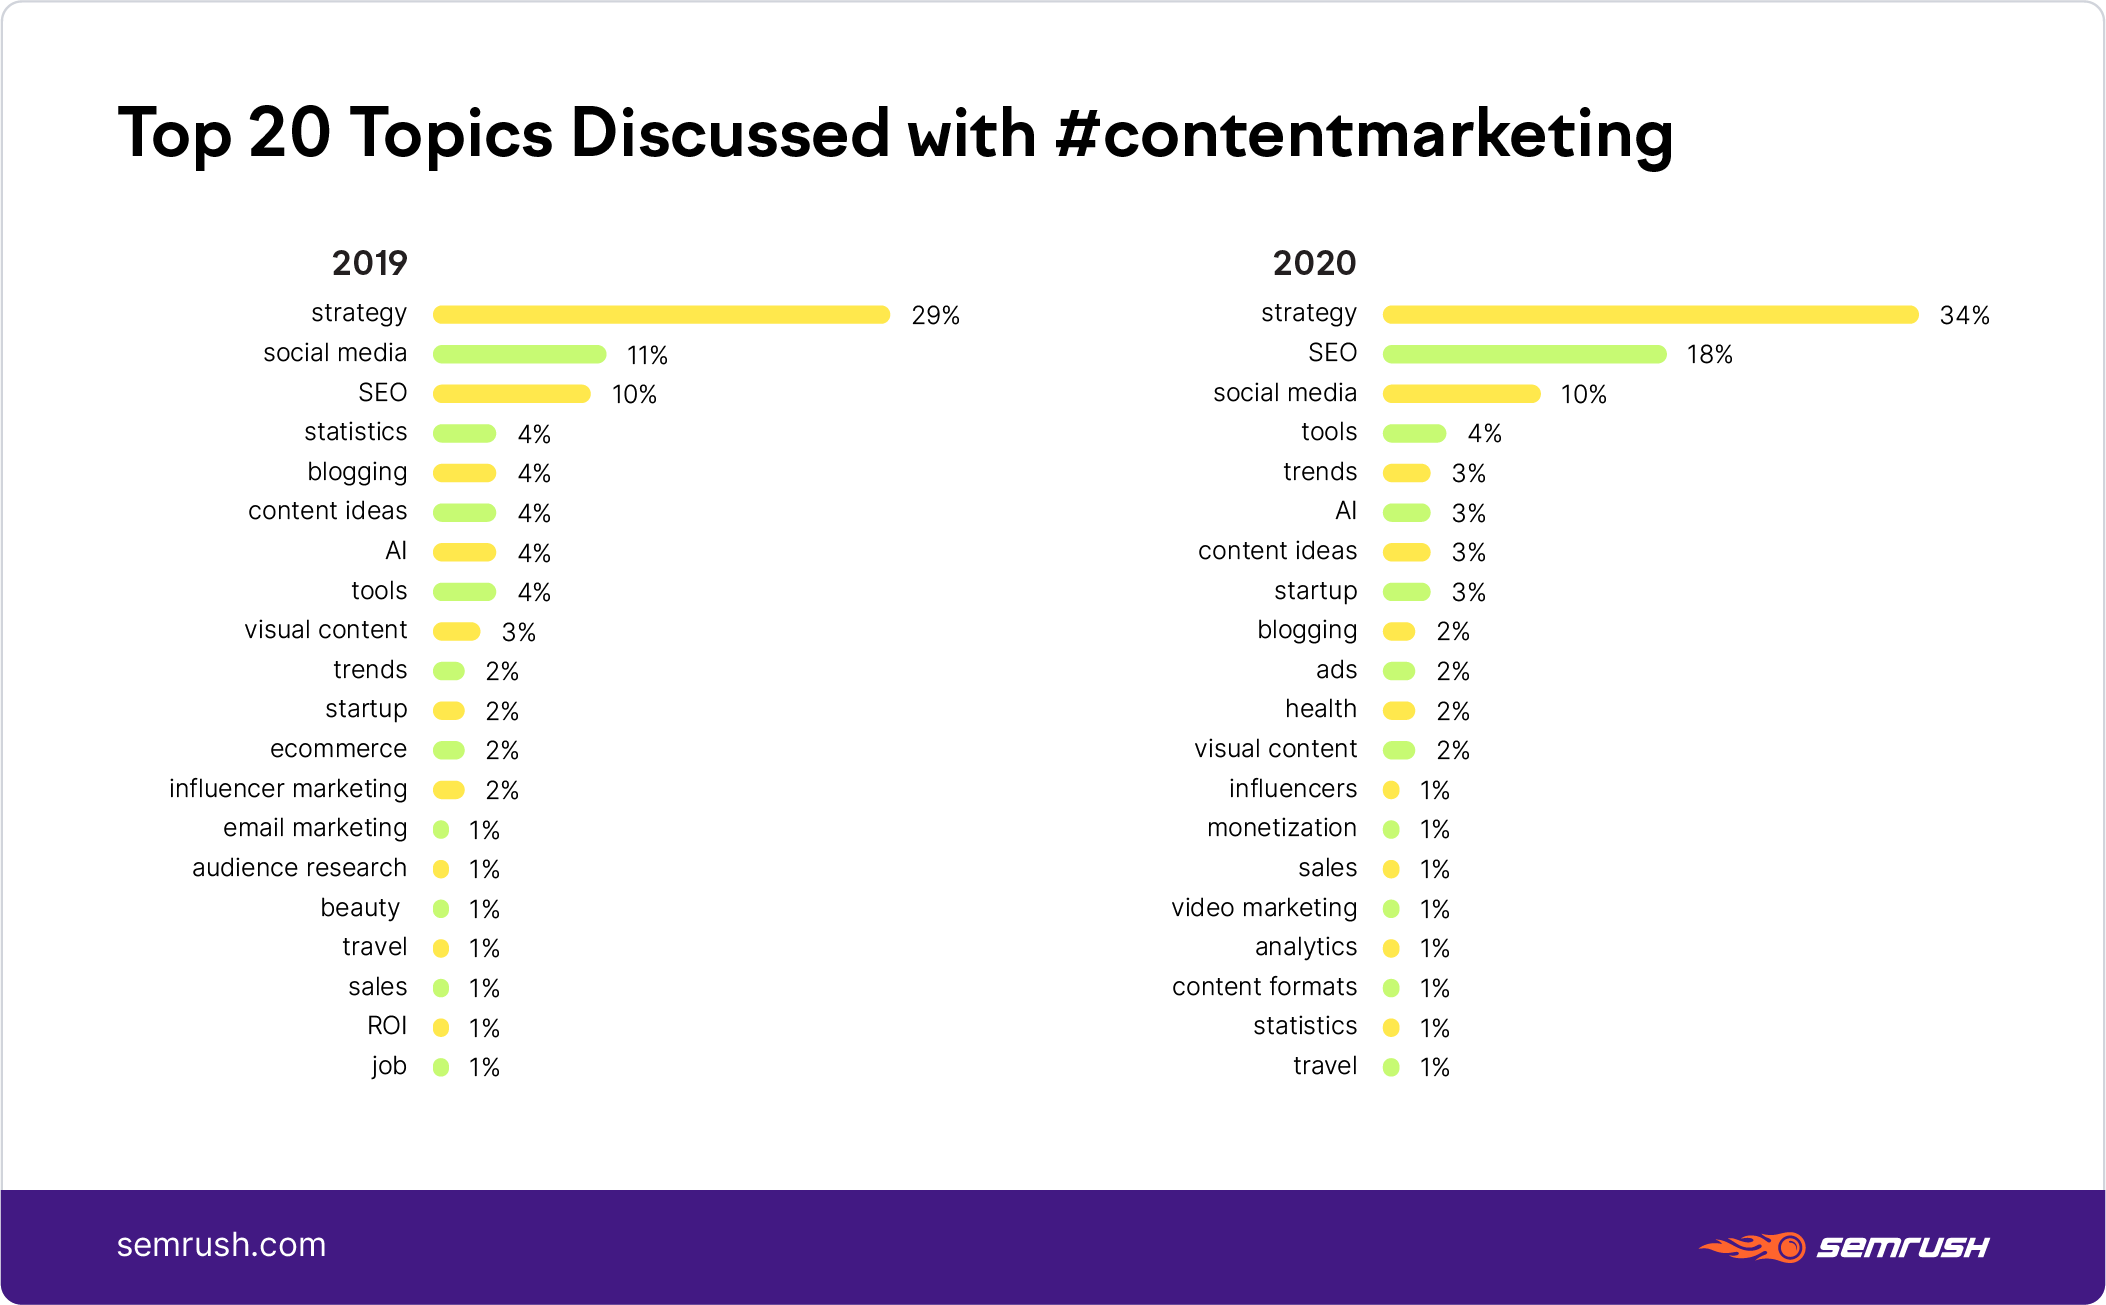 Top 20 topics discussed with #contentmarketing hashtag